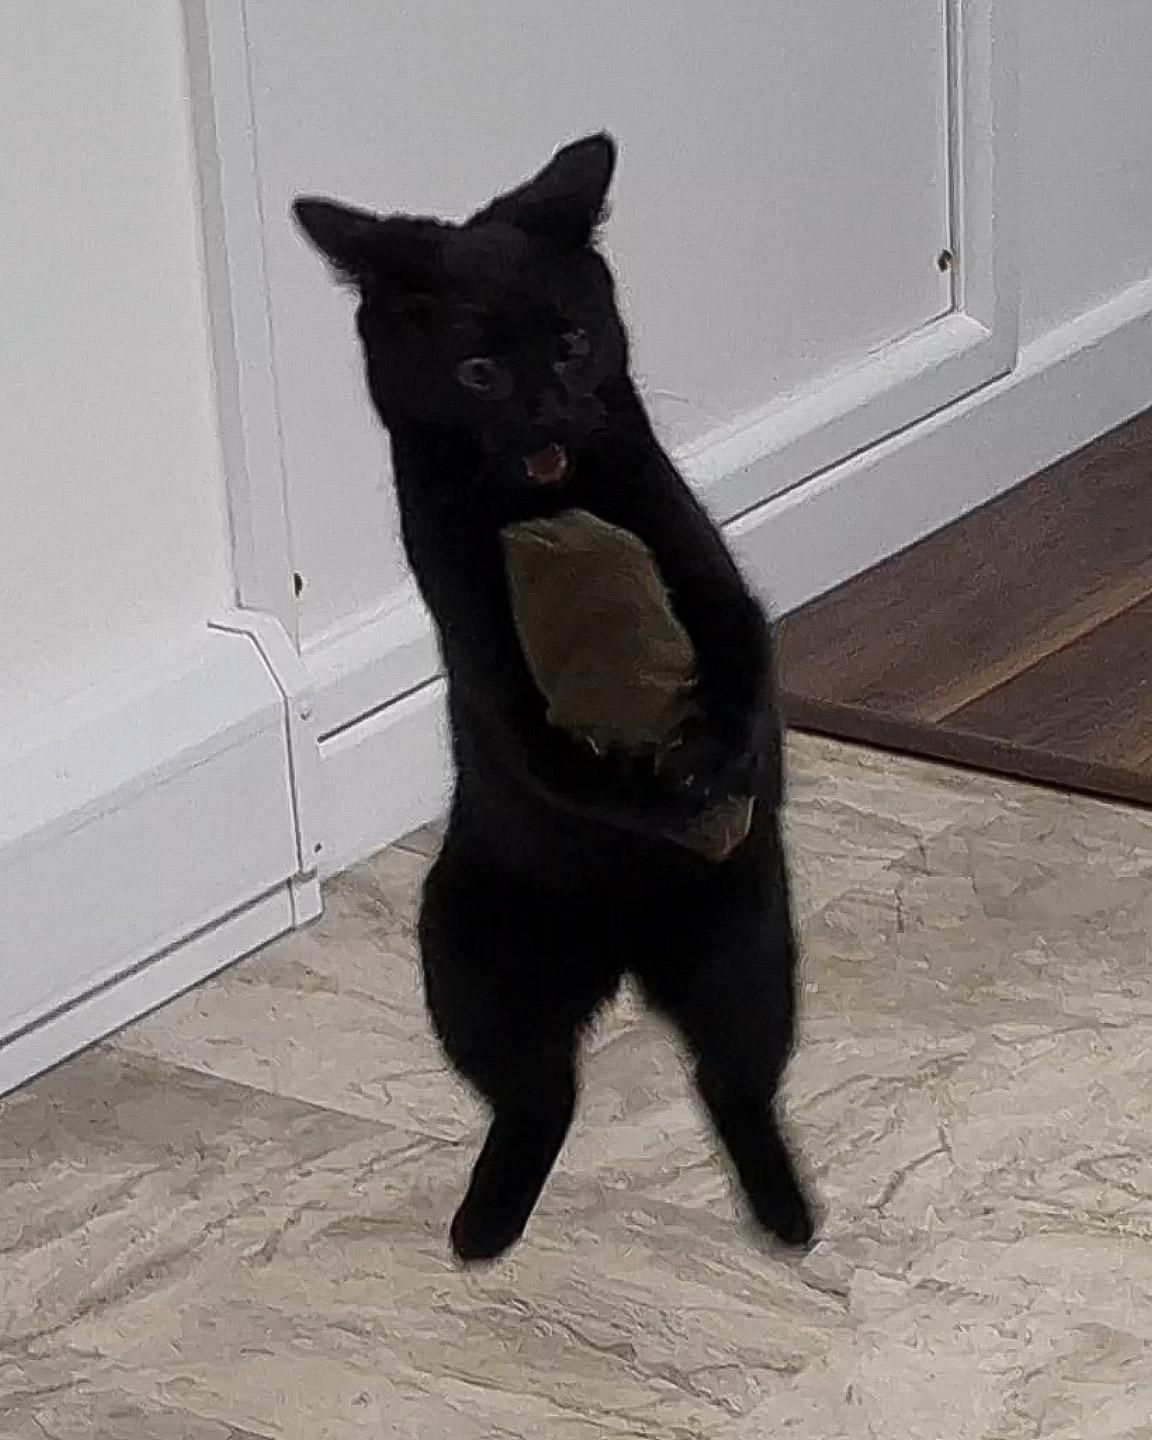 My kitten has just discovered the joys of paying with my socks